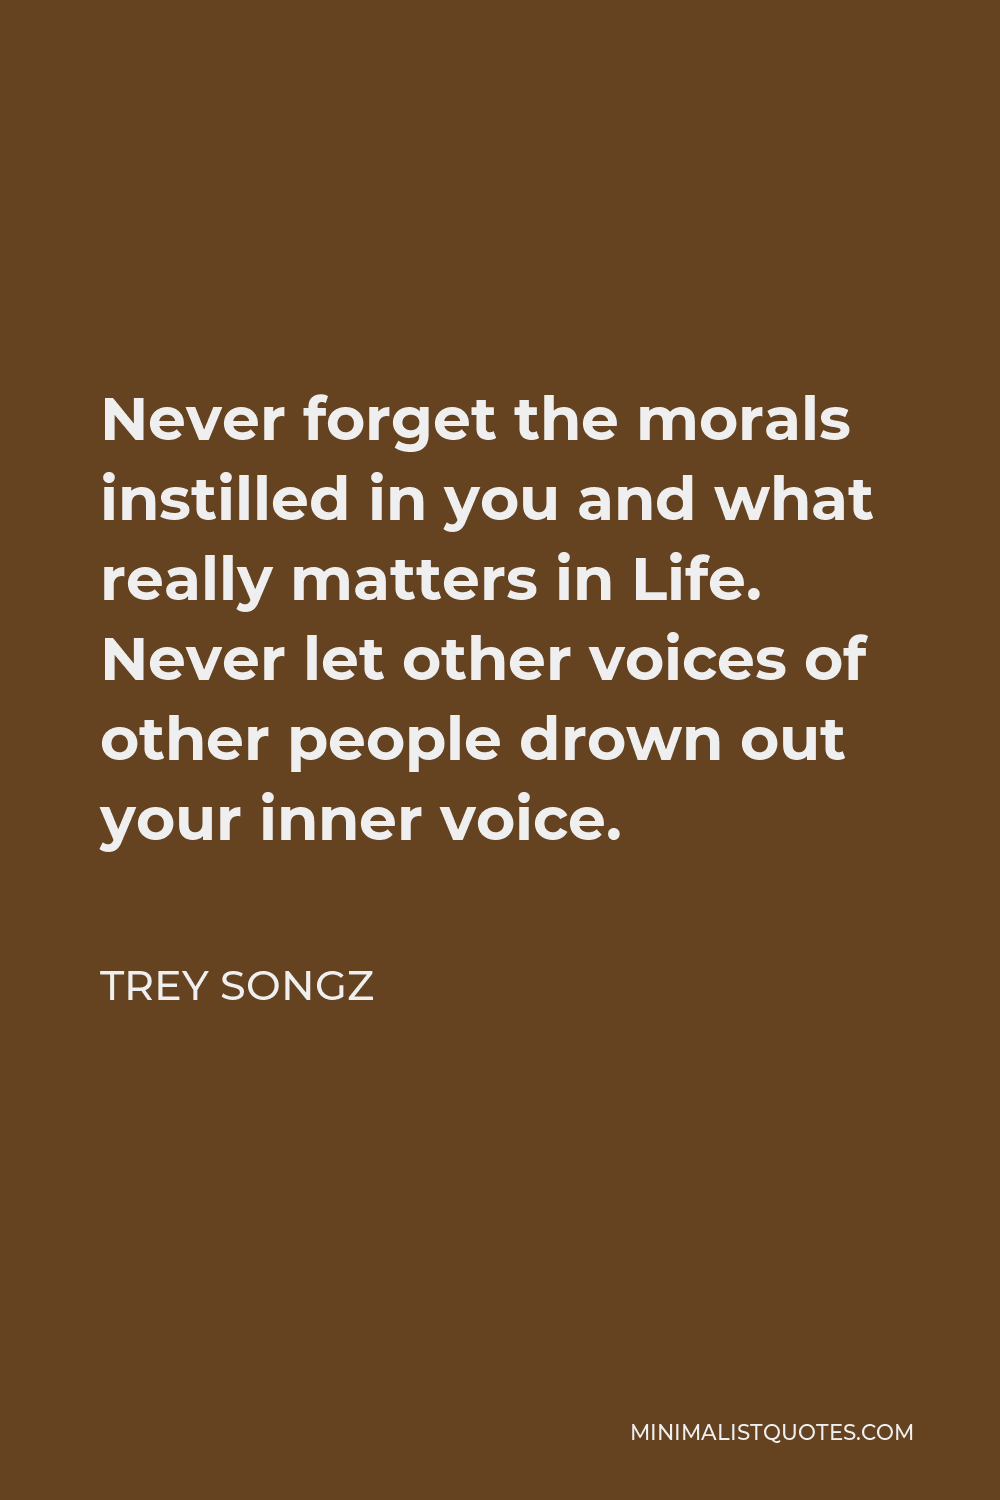 Trey Songz Quote - Never forget the morals instilled in you and what really matters in Life. Never let other voices of other people drown out your inner voice.